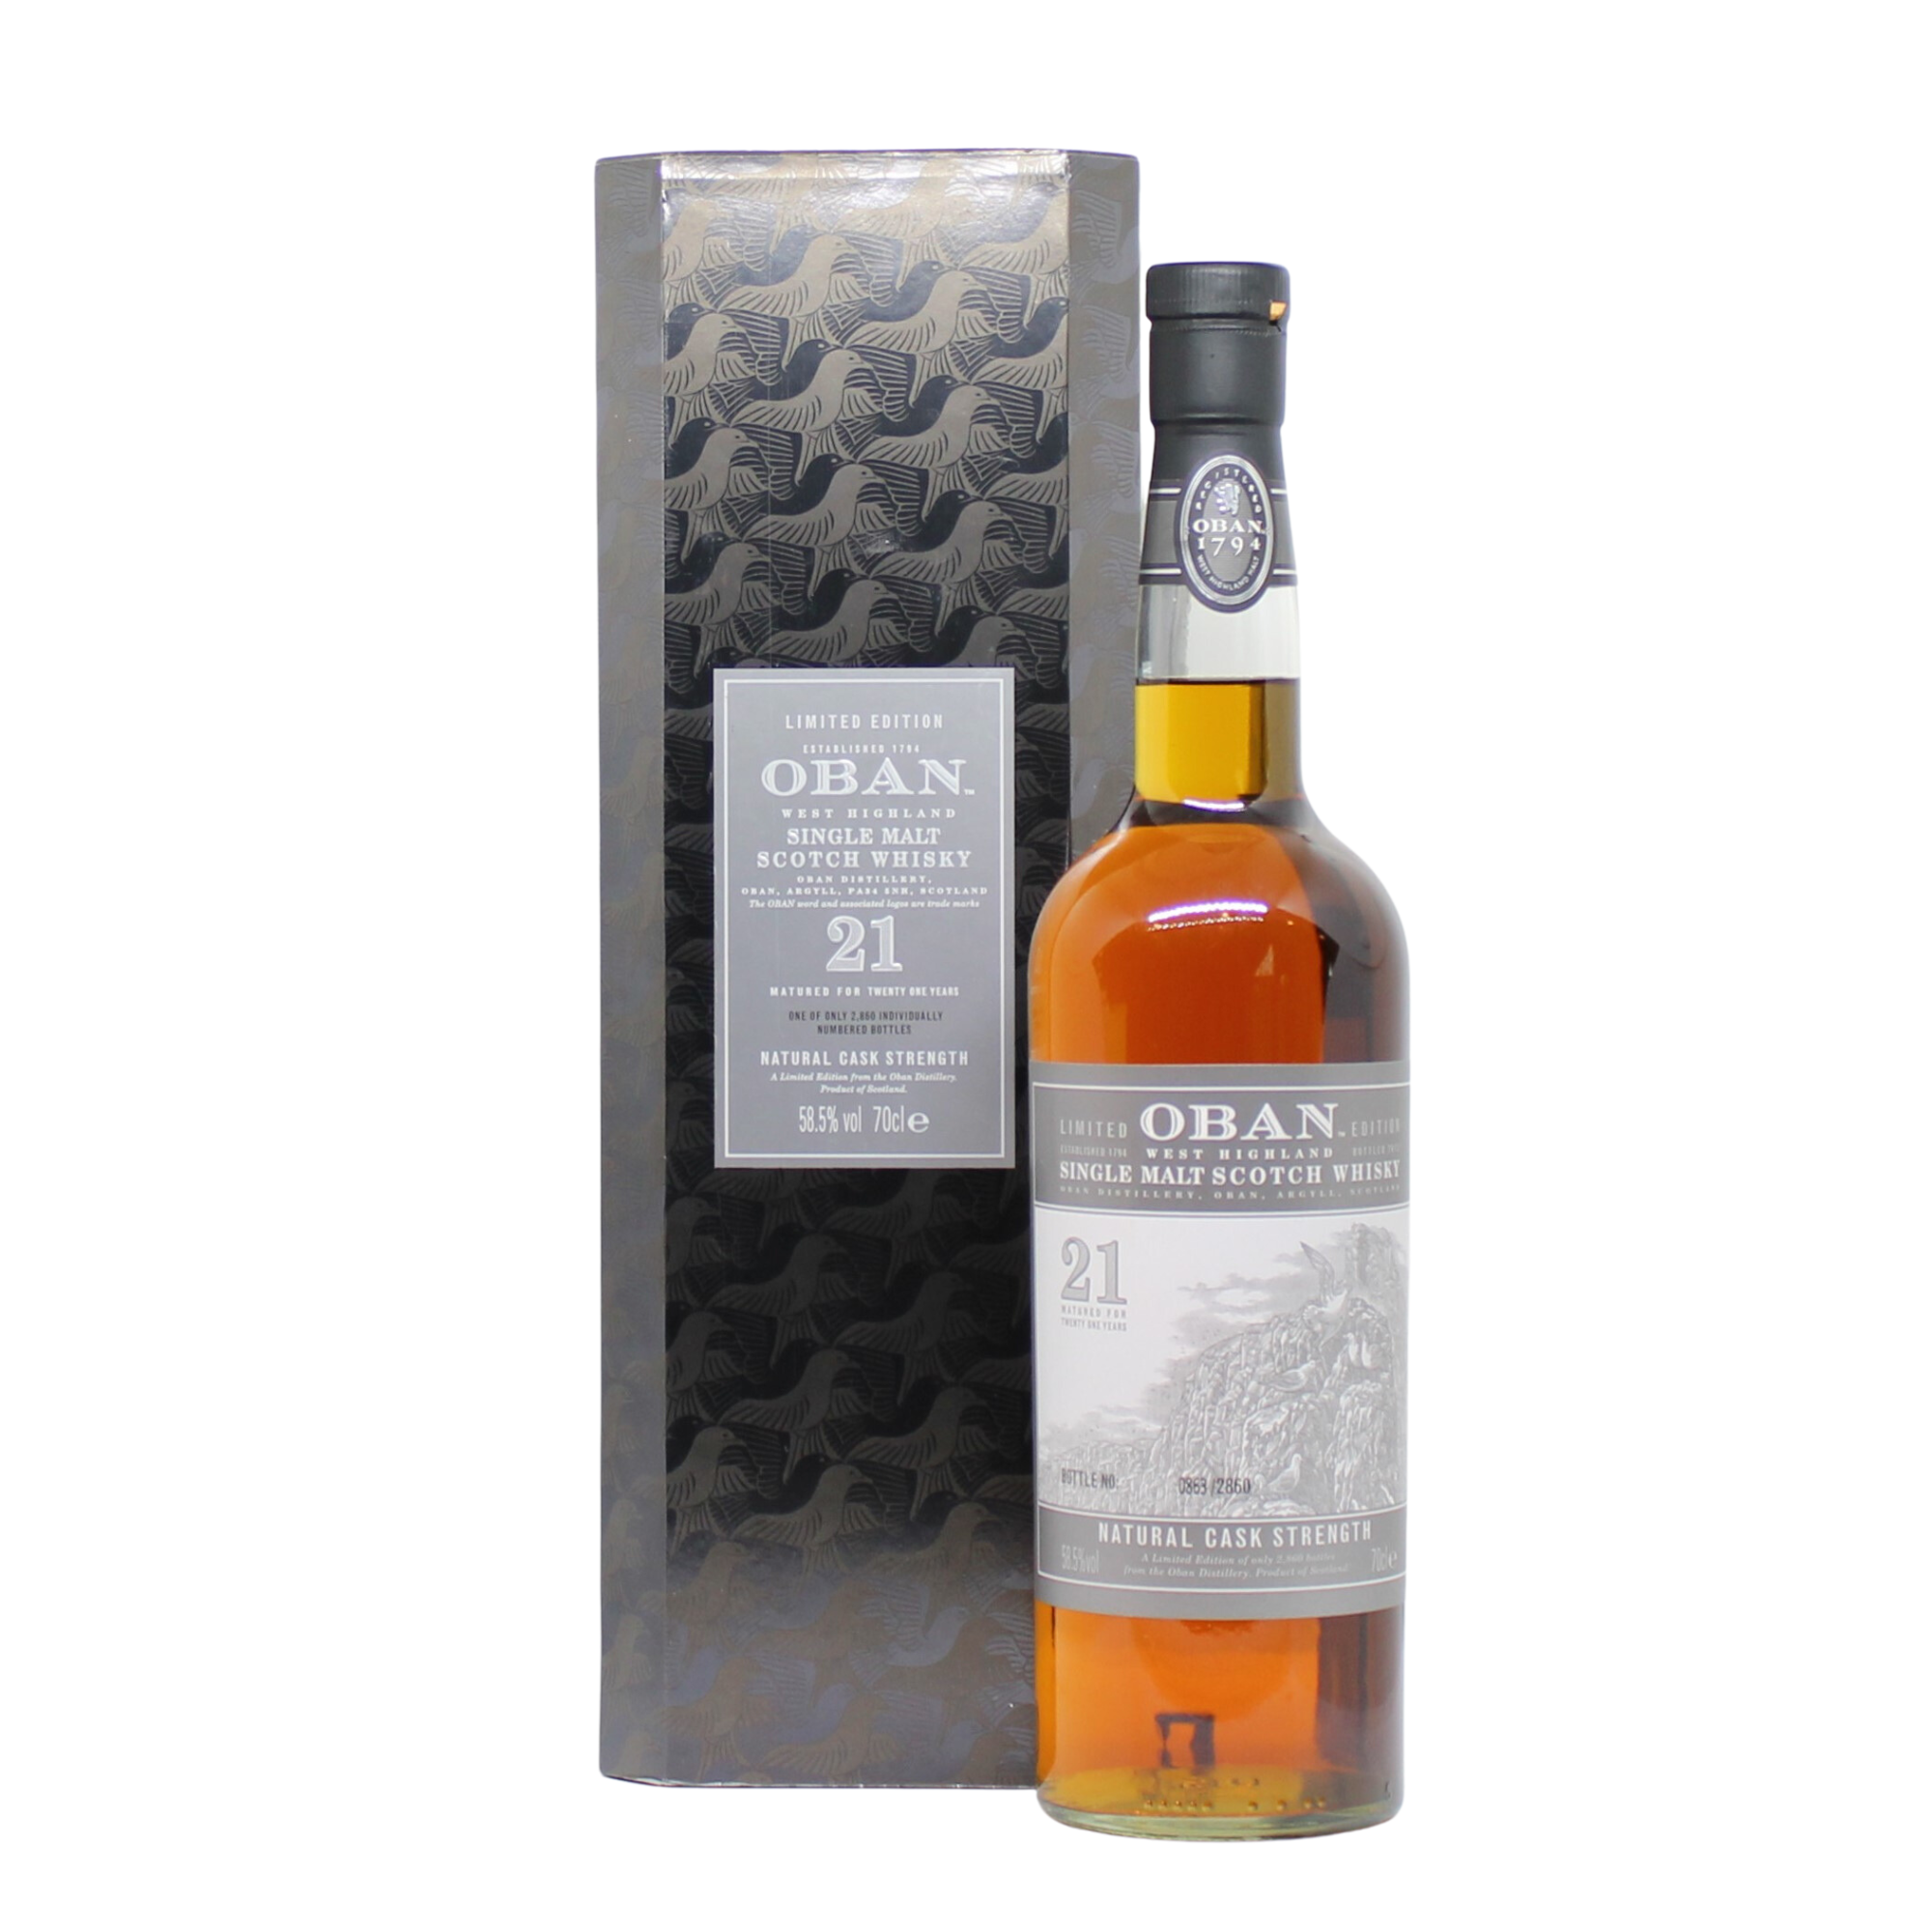 Oban 21 Limited Edition 2013 Special Release (Natural Cask Strength) Single Malt Scotch Whisky